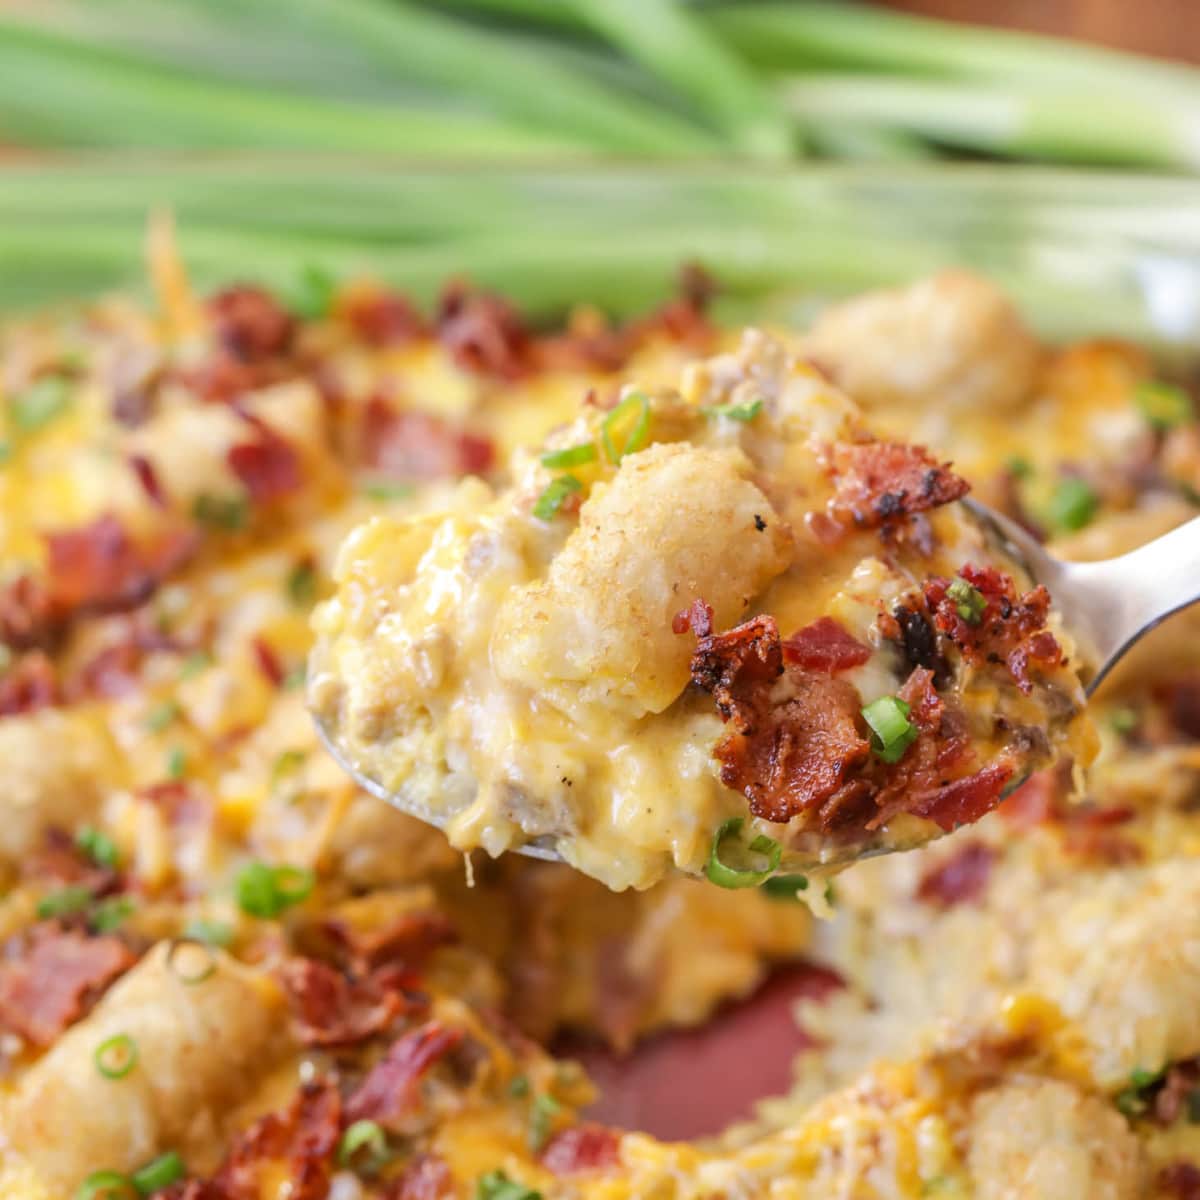 Close up of a spoon filled with Tater Tot Breakfast Casserole.